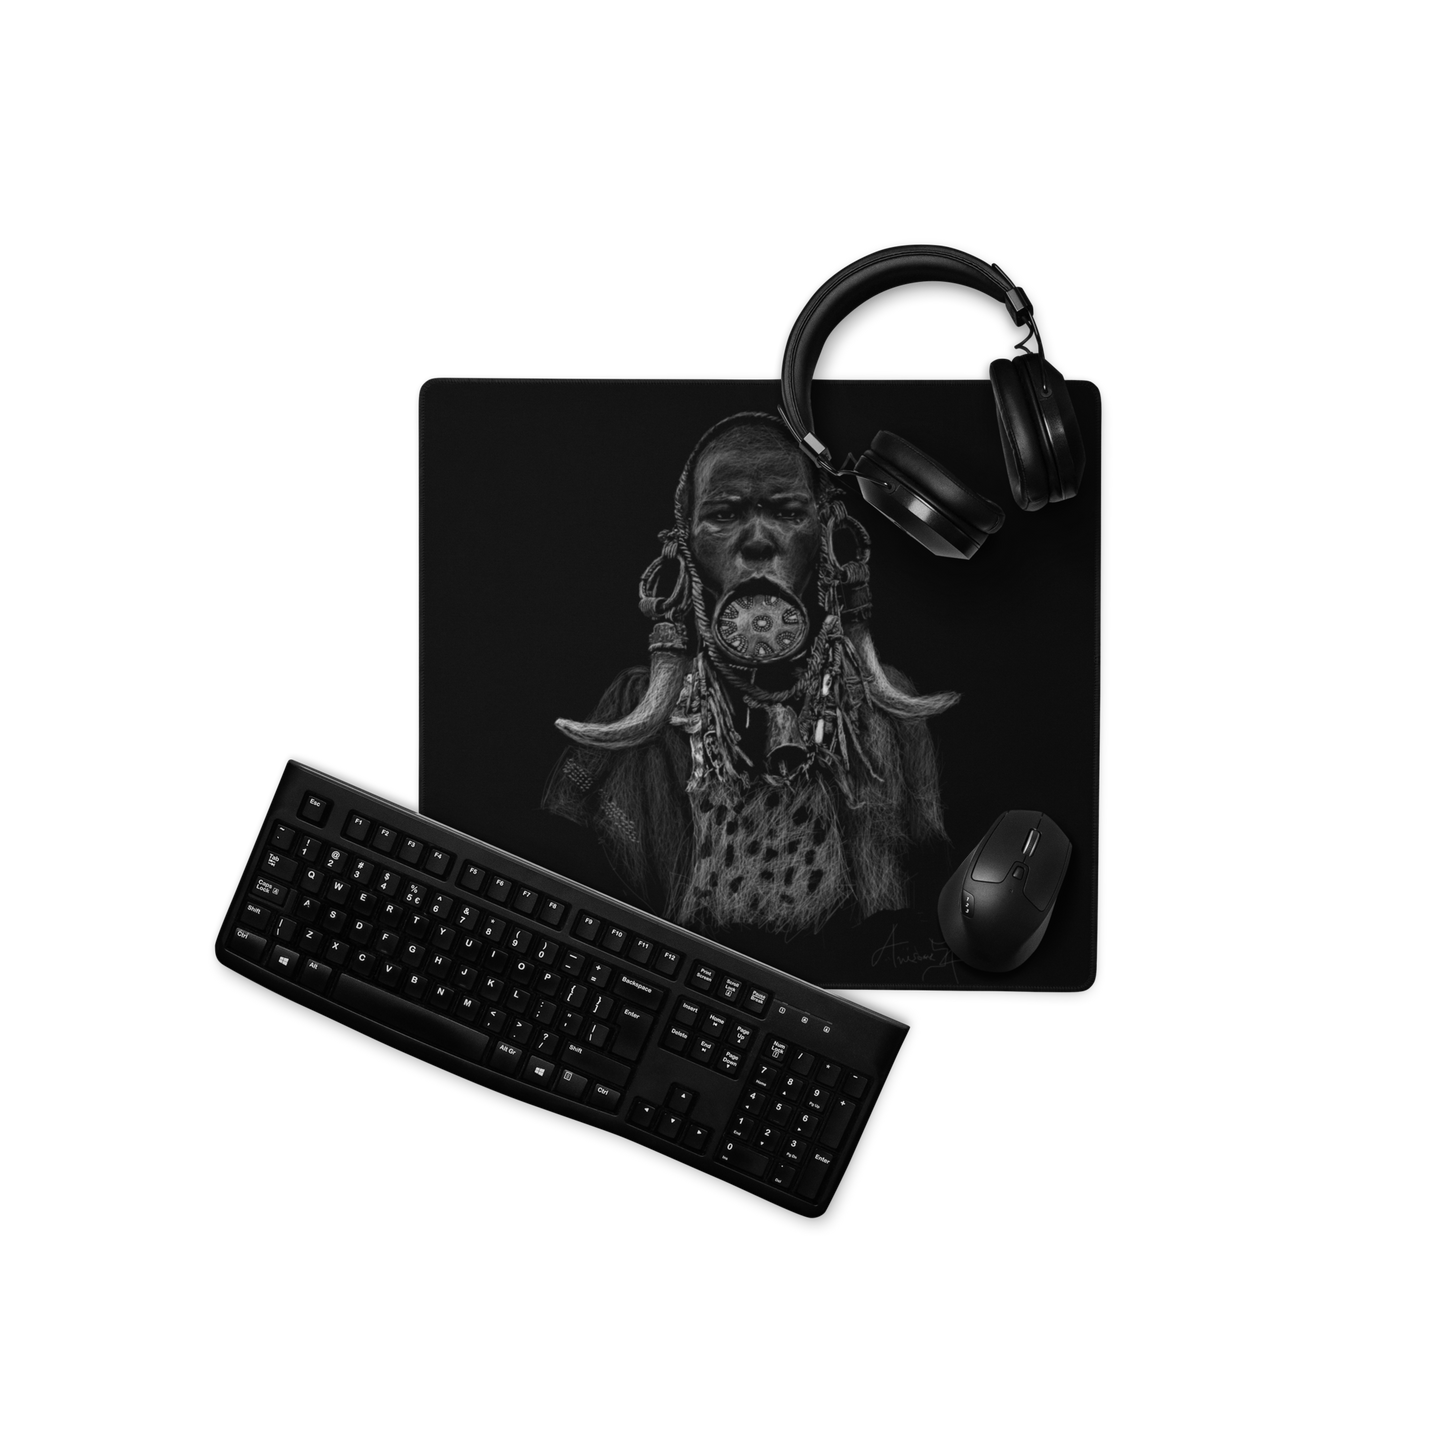 African Beauty by Samuel Friday - Gaming mouse pad